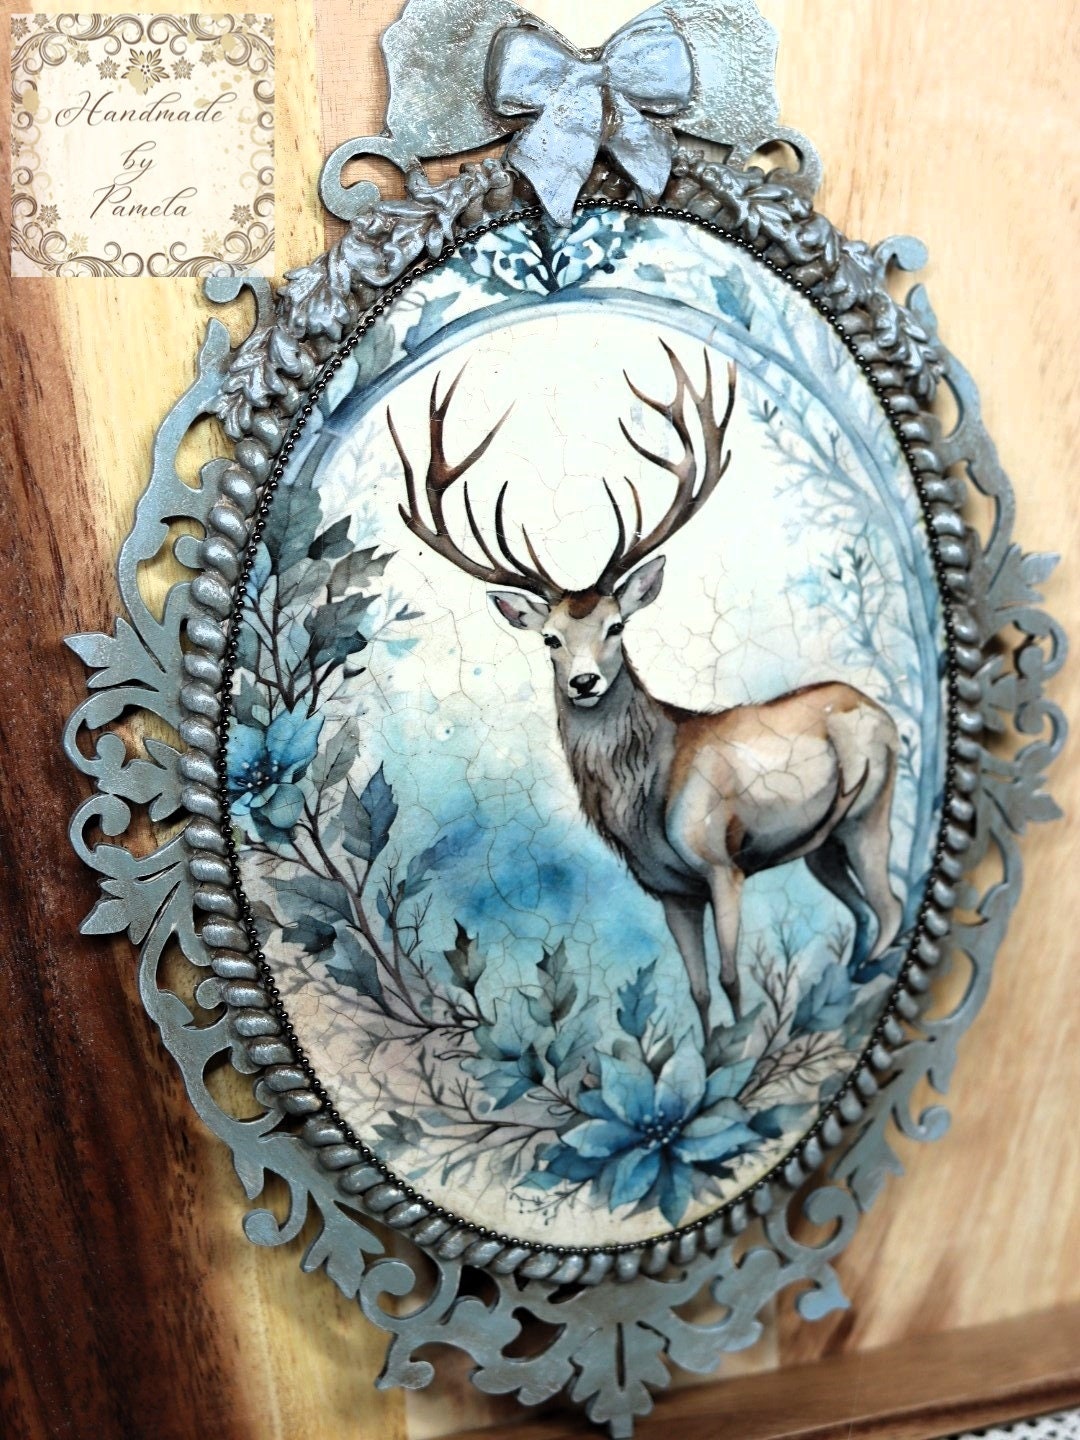 Handcrafted, Mixed Media, Shabby Chic, Decoupage, Plaque, Panel, Christmas, Blue Stag, Plaque, Vintage Style, Antique Style, Laser Cut MDF